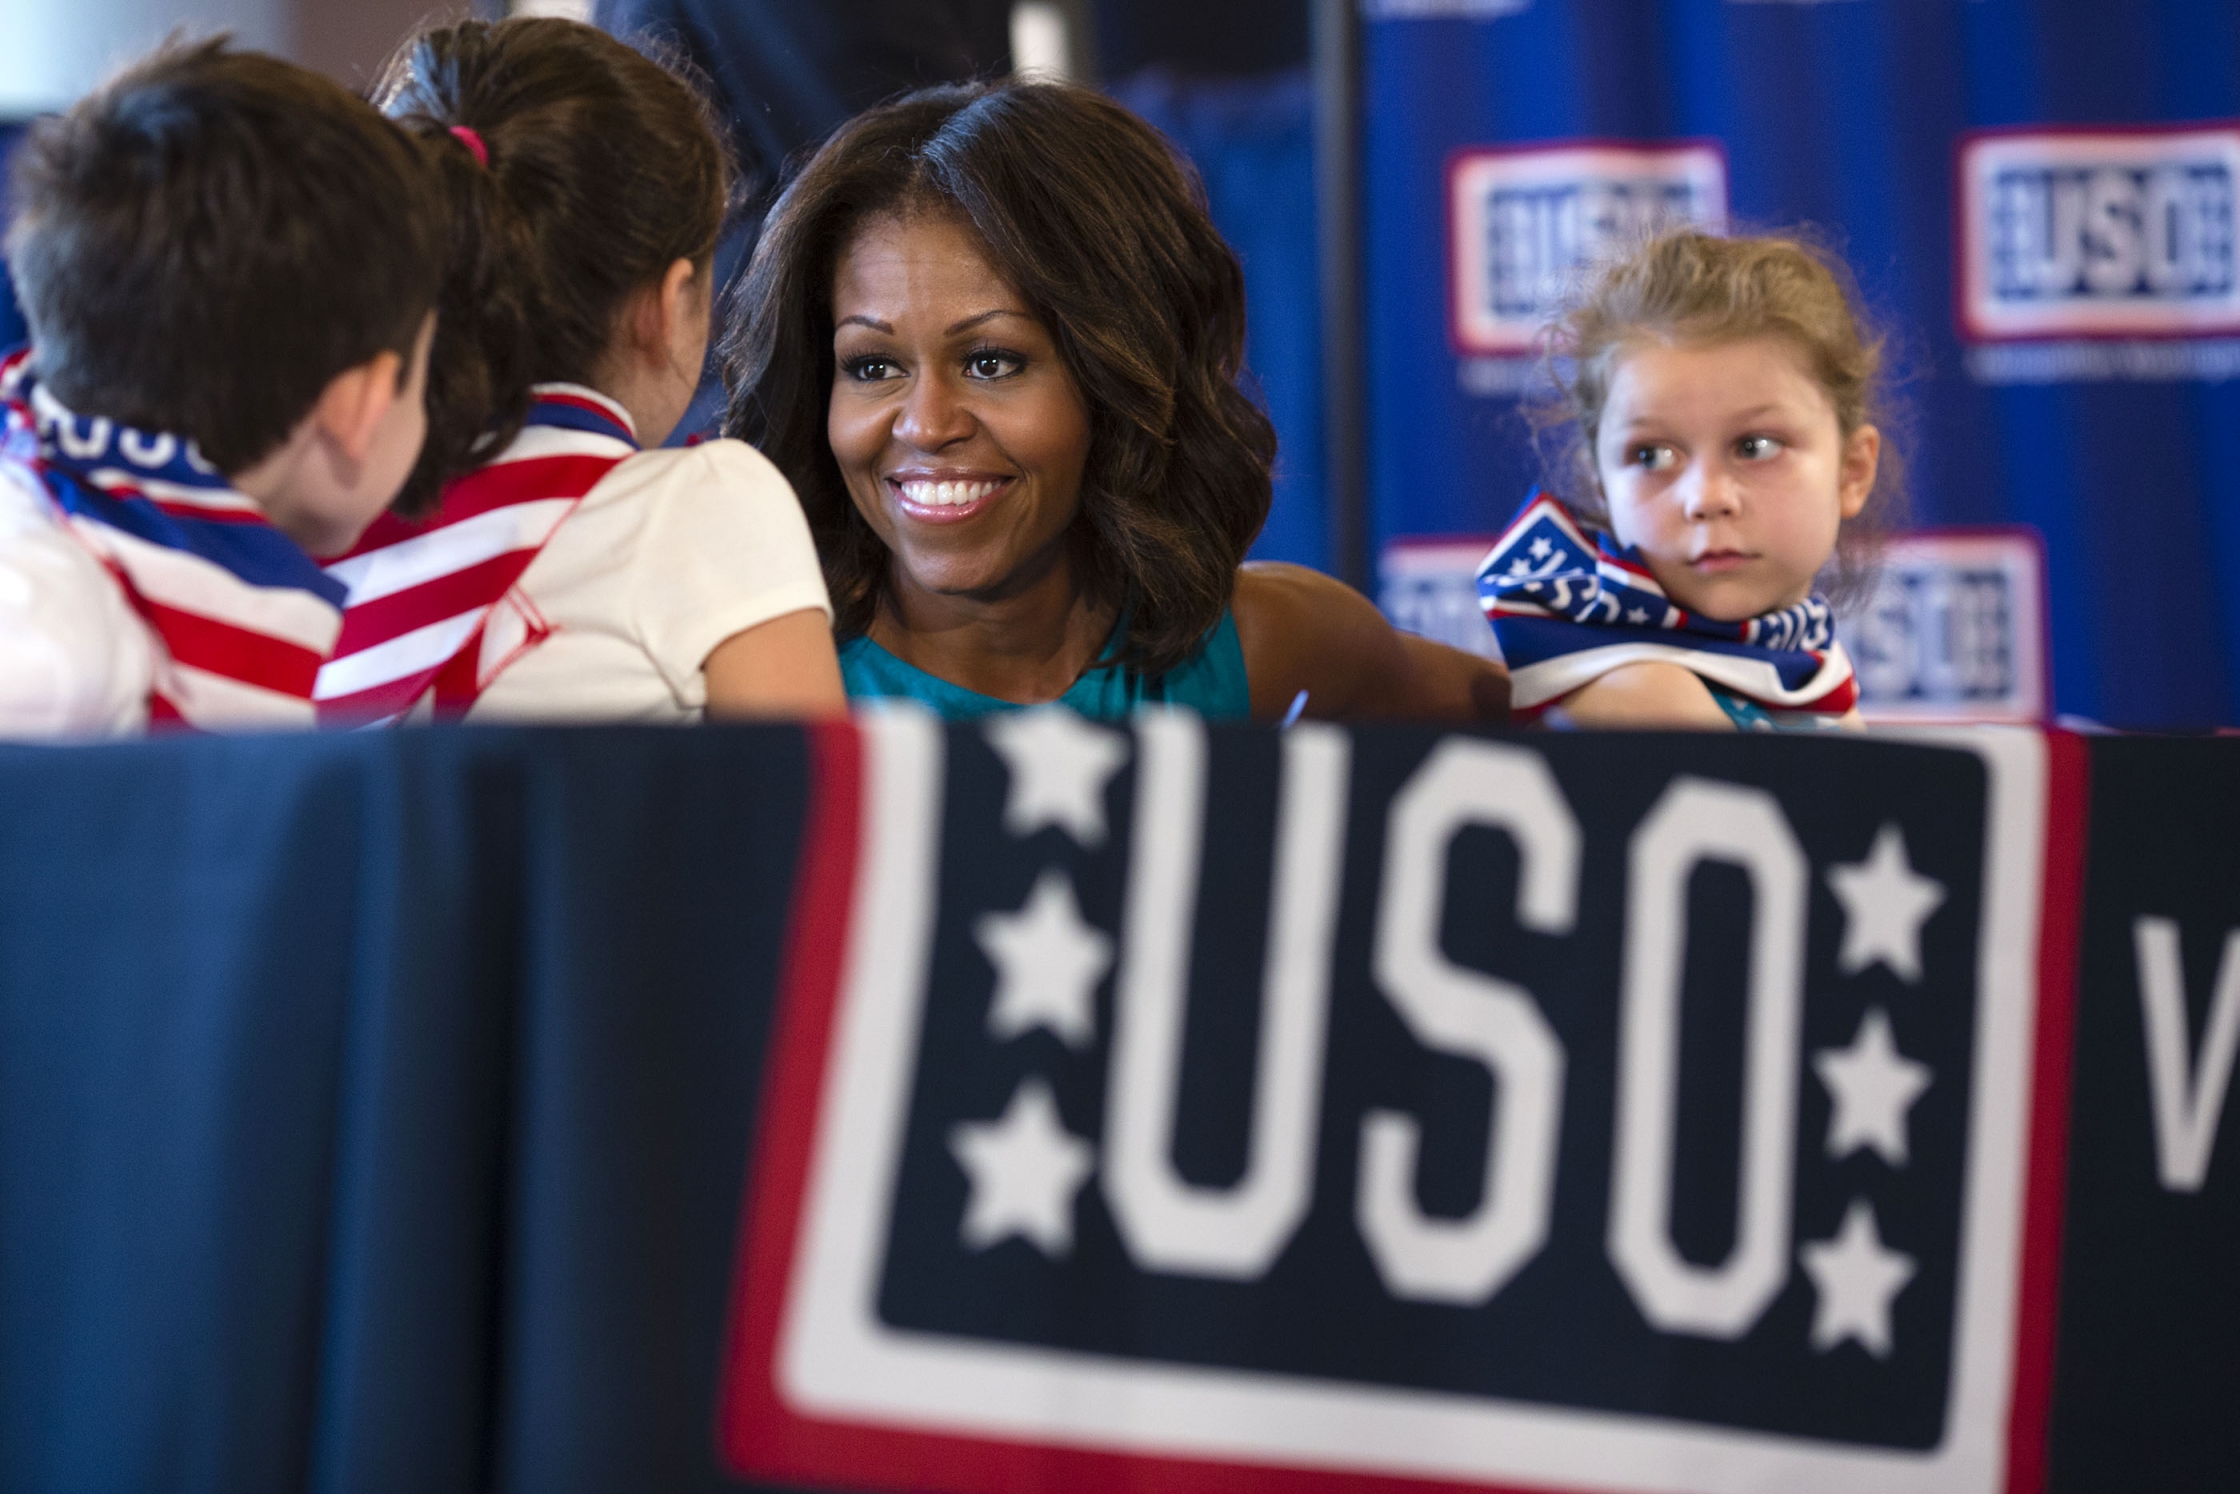 The First Lady joins children in an American flag art project at the USO Warrior and Family Center in Ft. Belvoir